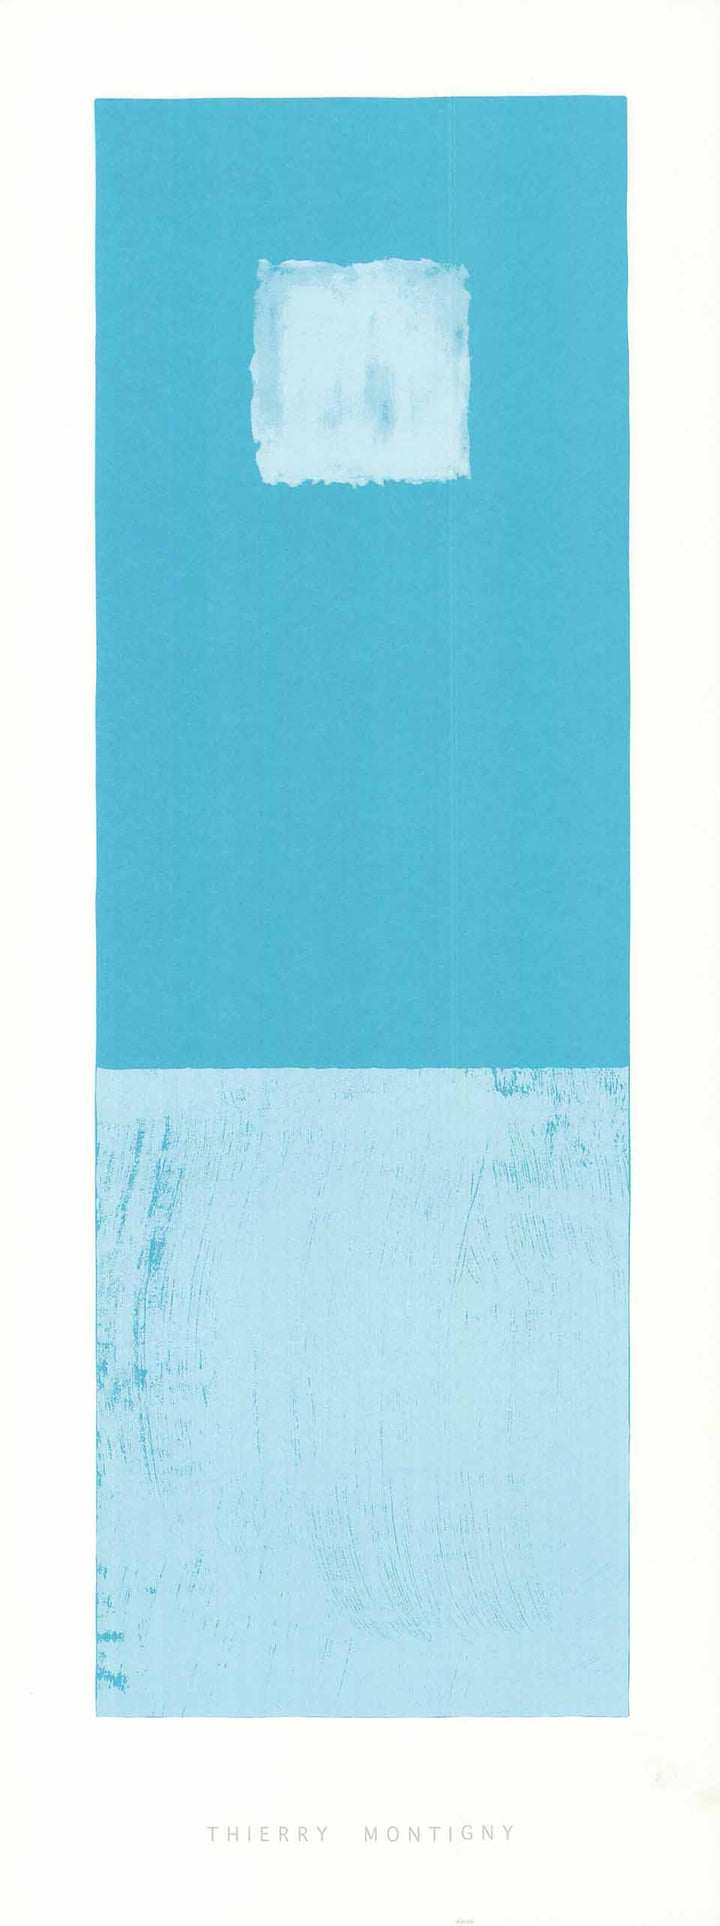 Untitled, 2006 by Thierry Montigny - 14 X 36 Inches - (Silkscreen / Sérigraphie)